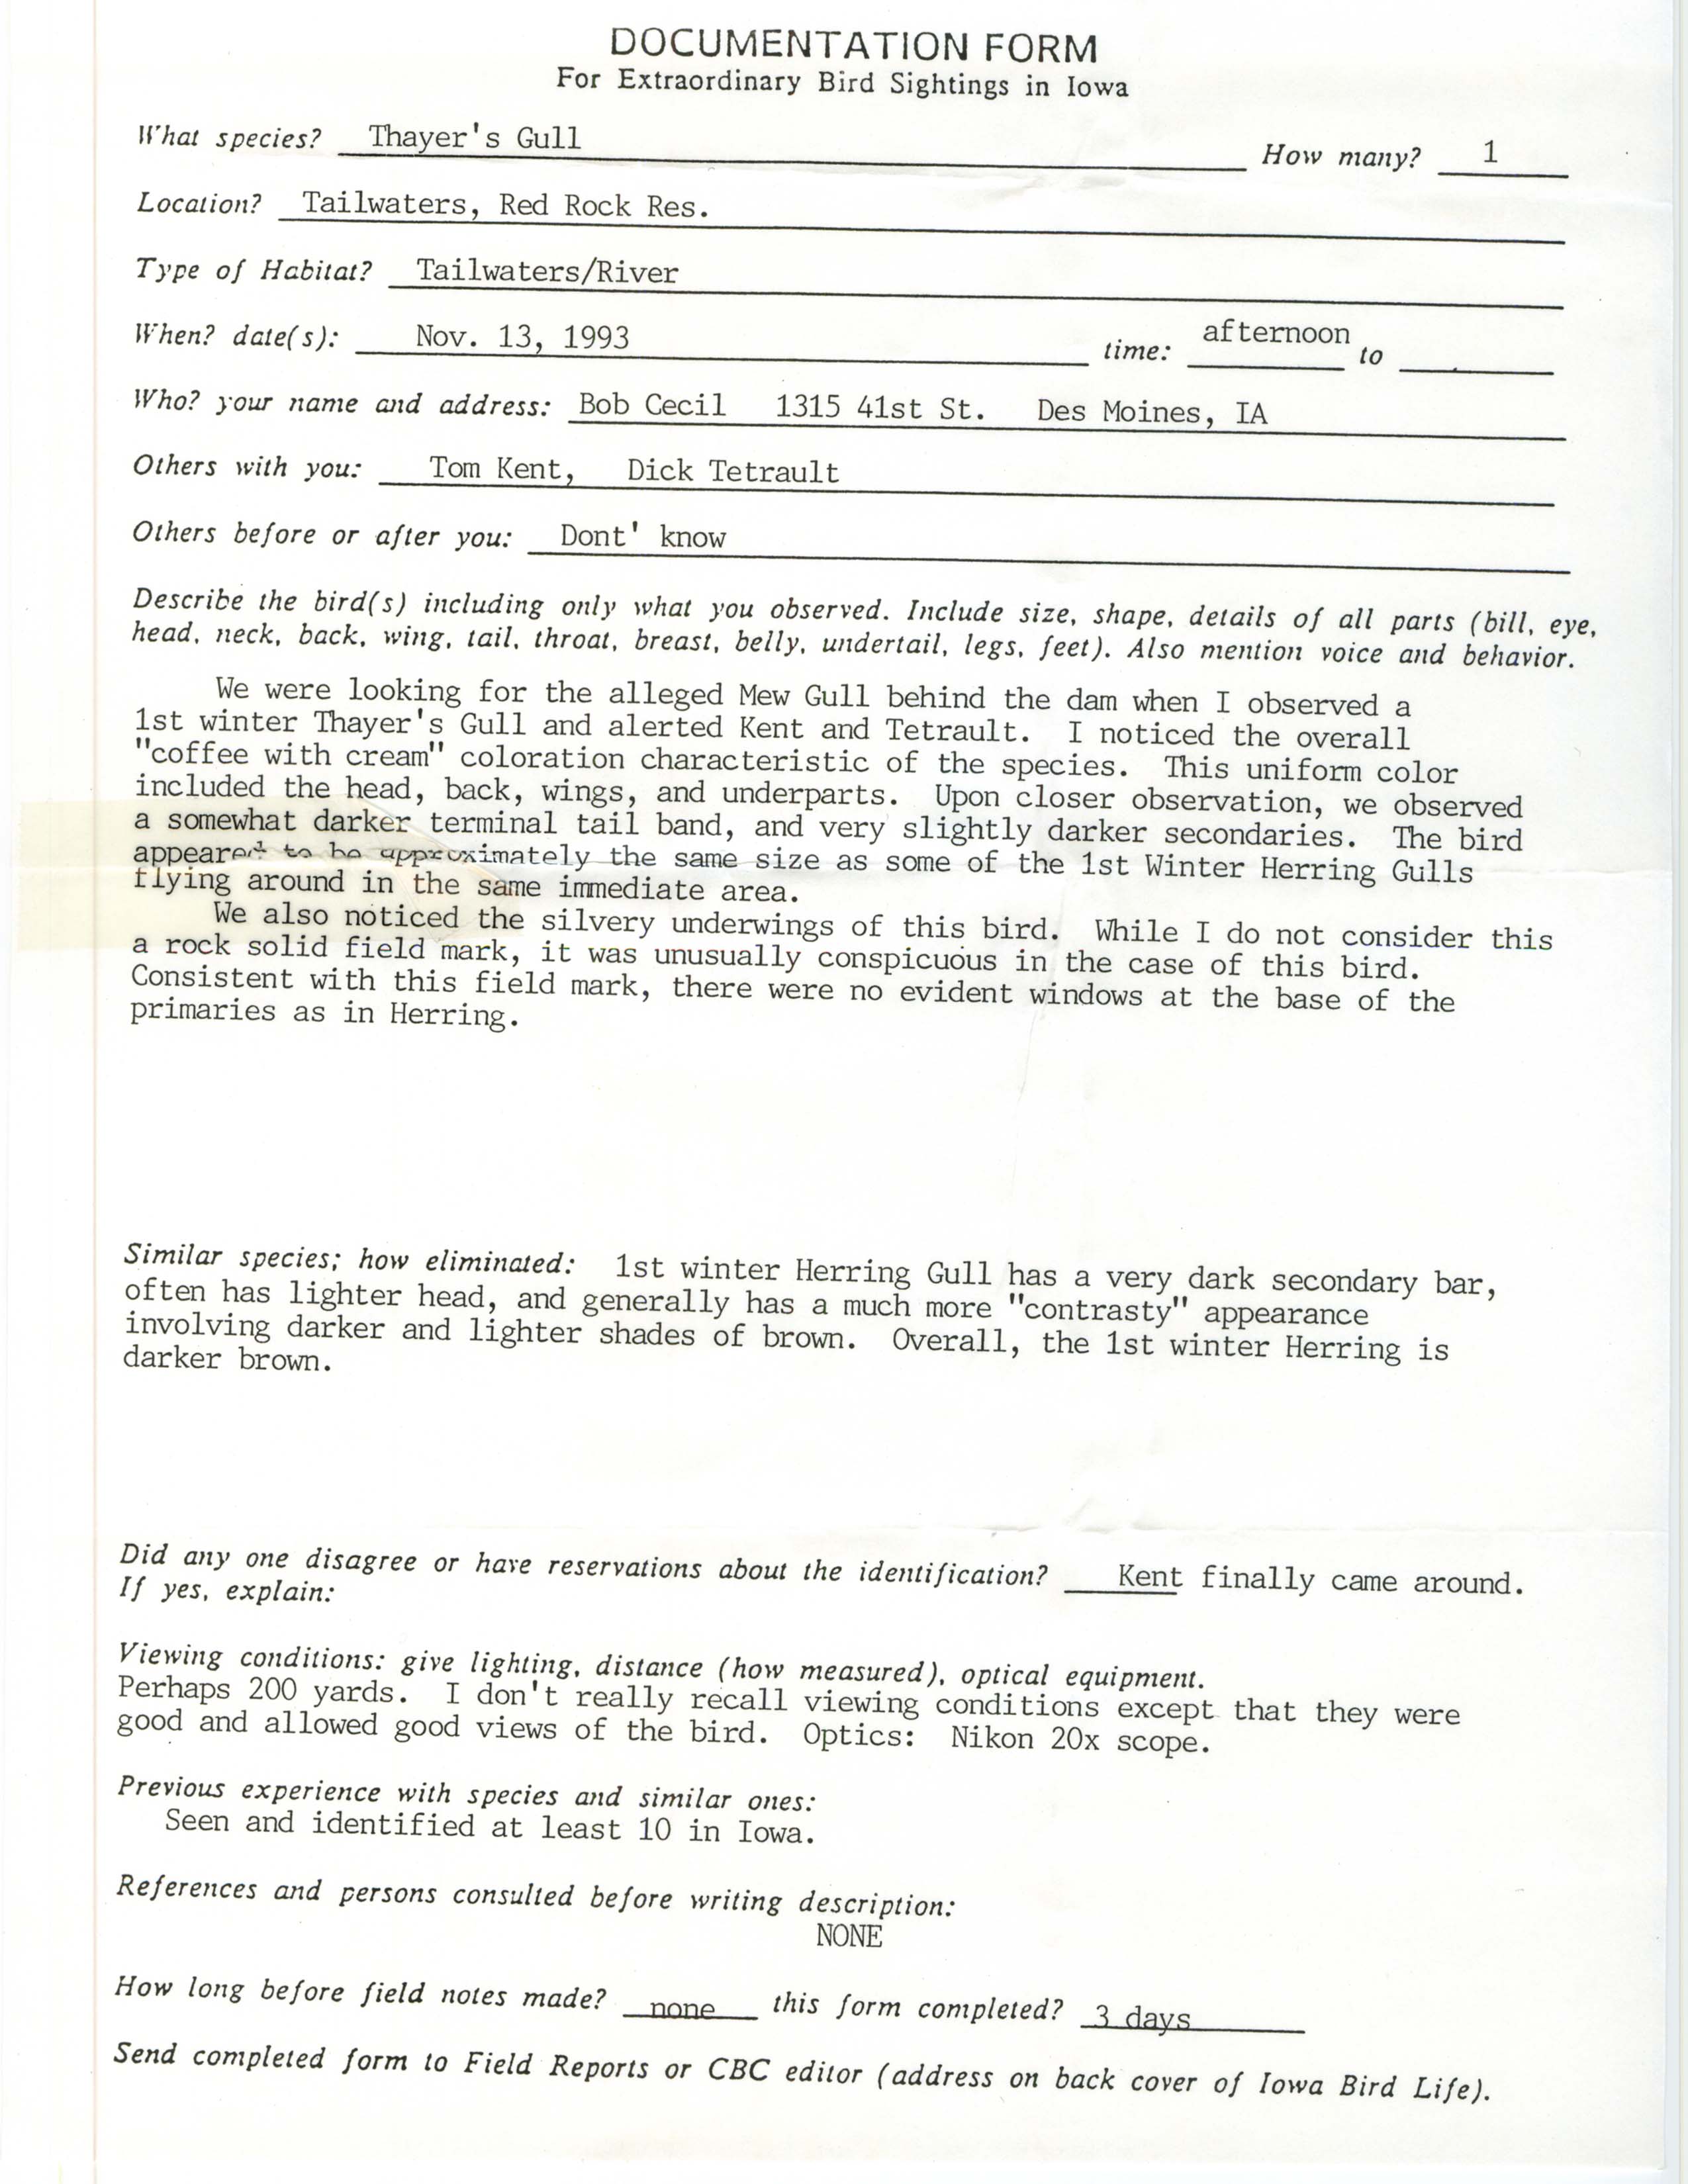 Rare bird documentation form for Thayer's Gull at Red Rock Reservoir, 1993